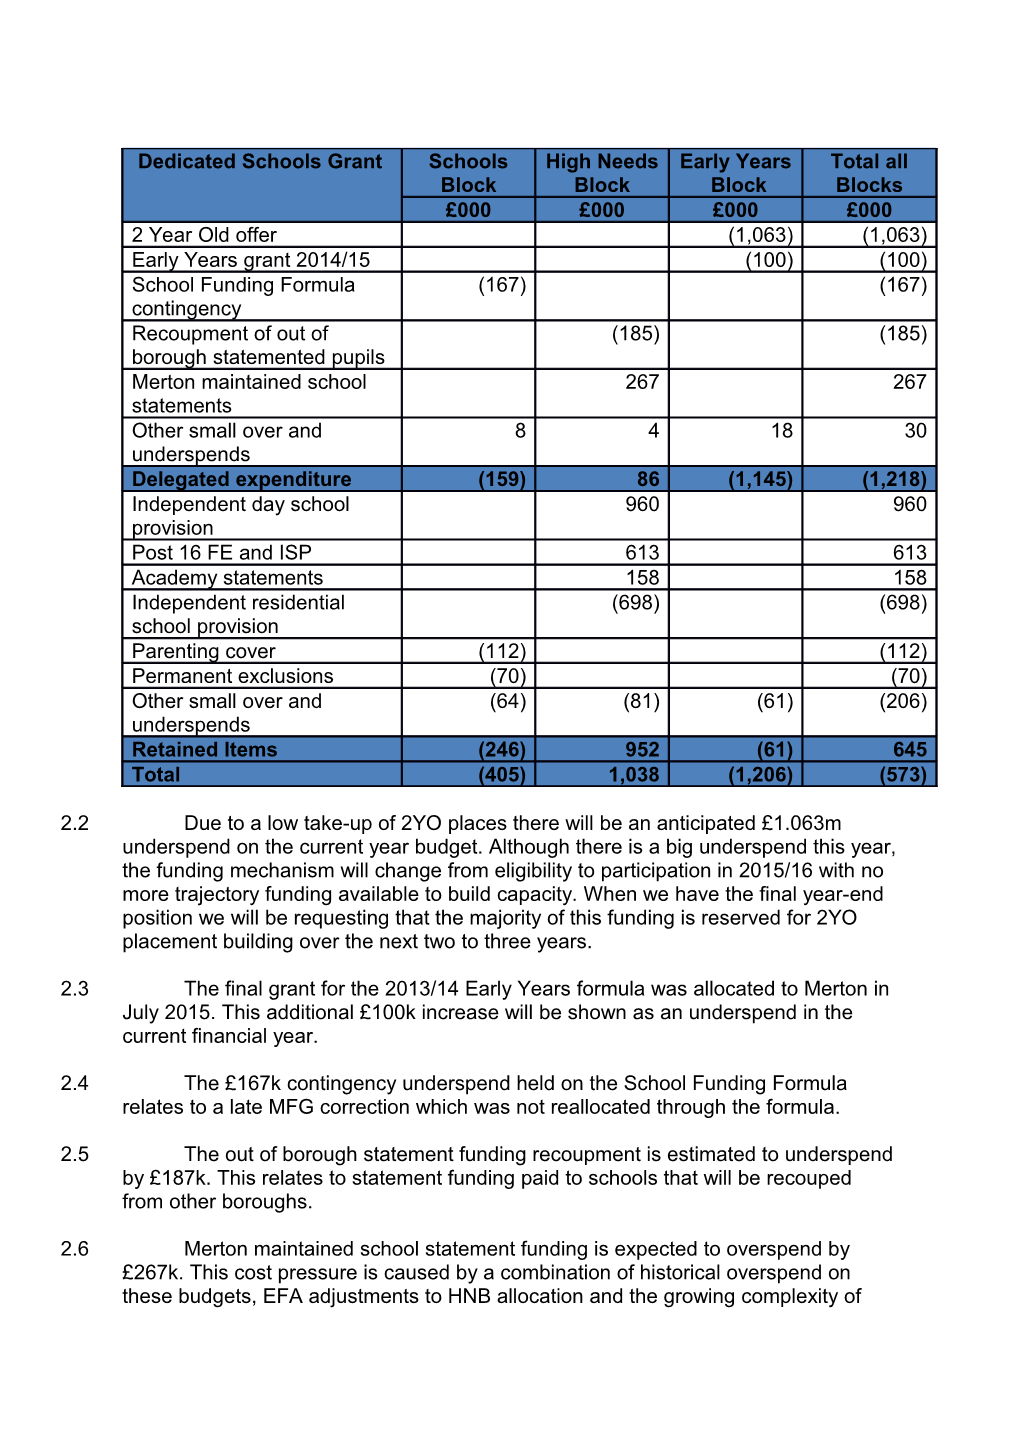 SUBJECT: DSG Budget Monitoring Report for February 2015